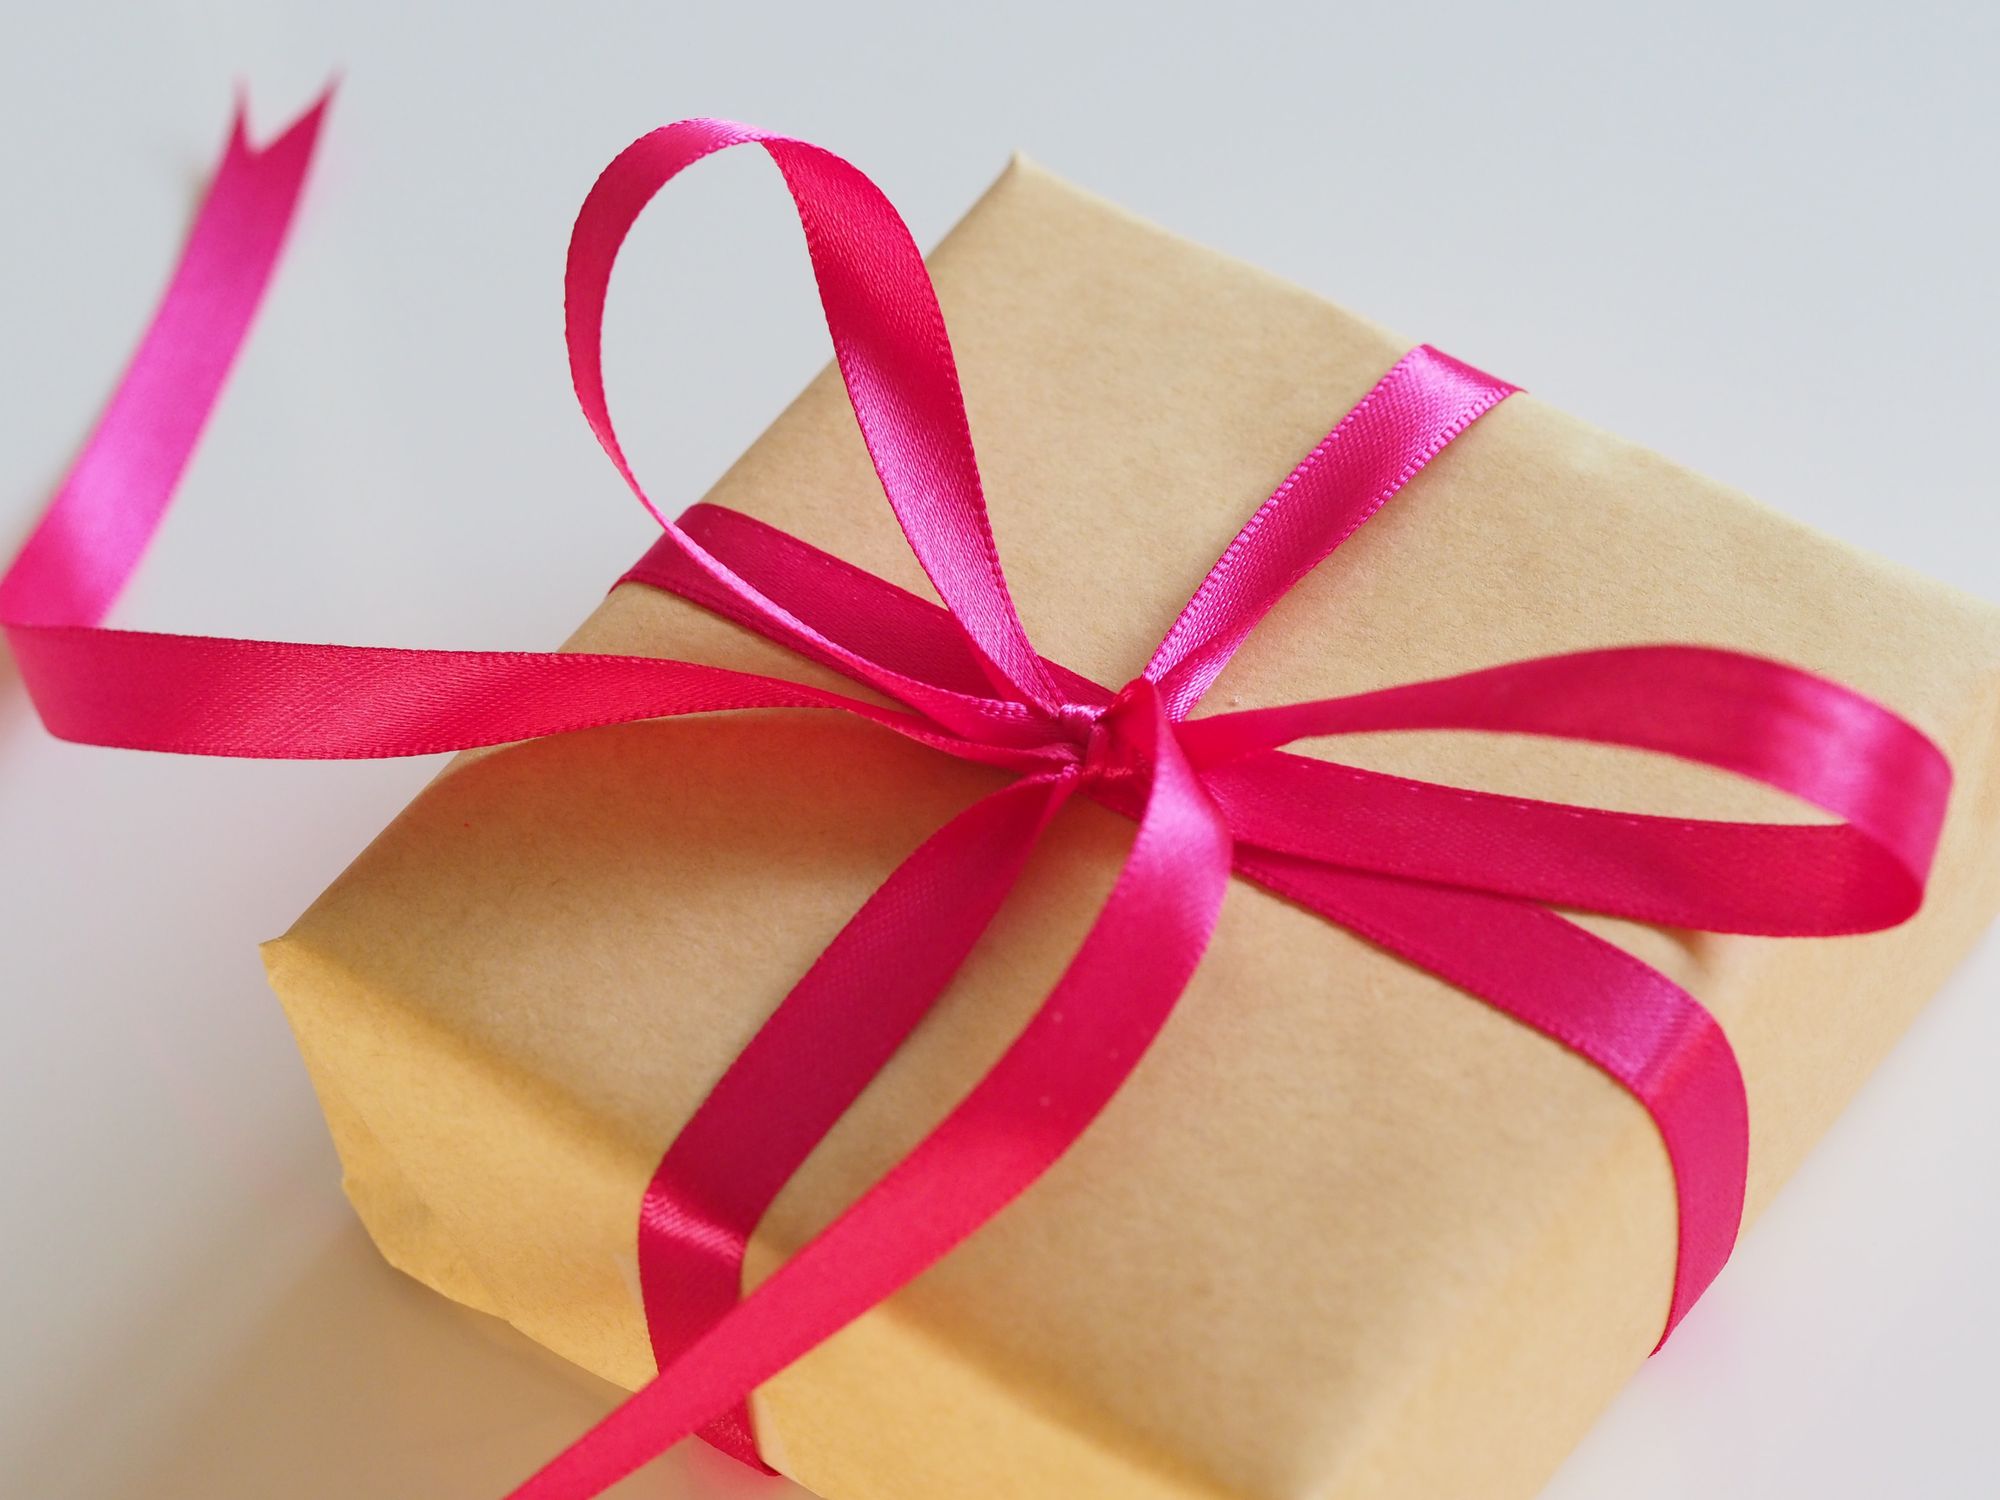 Earn Bitcoin on the Perfect Last-Minute Valentine's Day Gifts